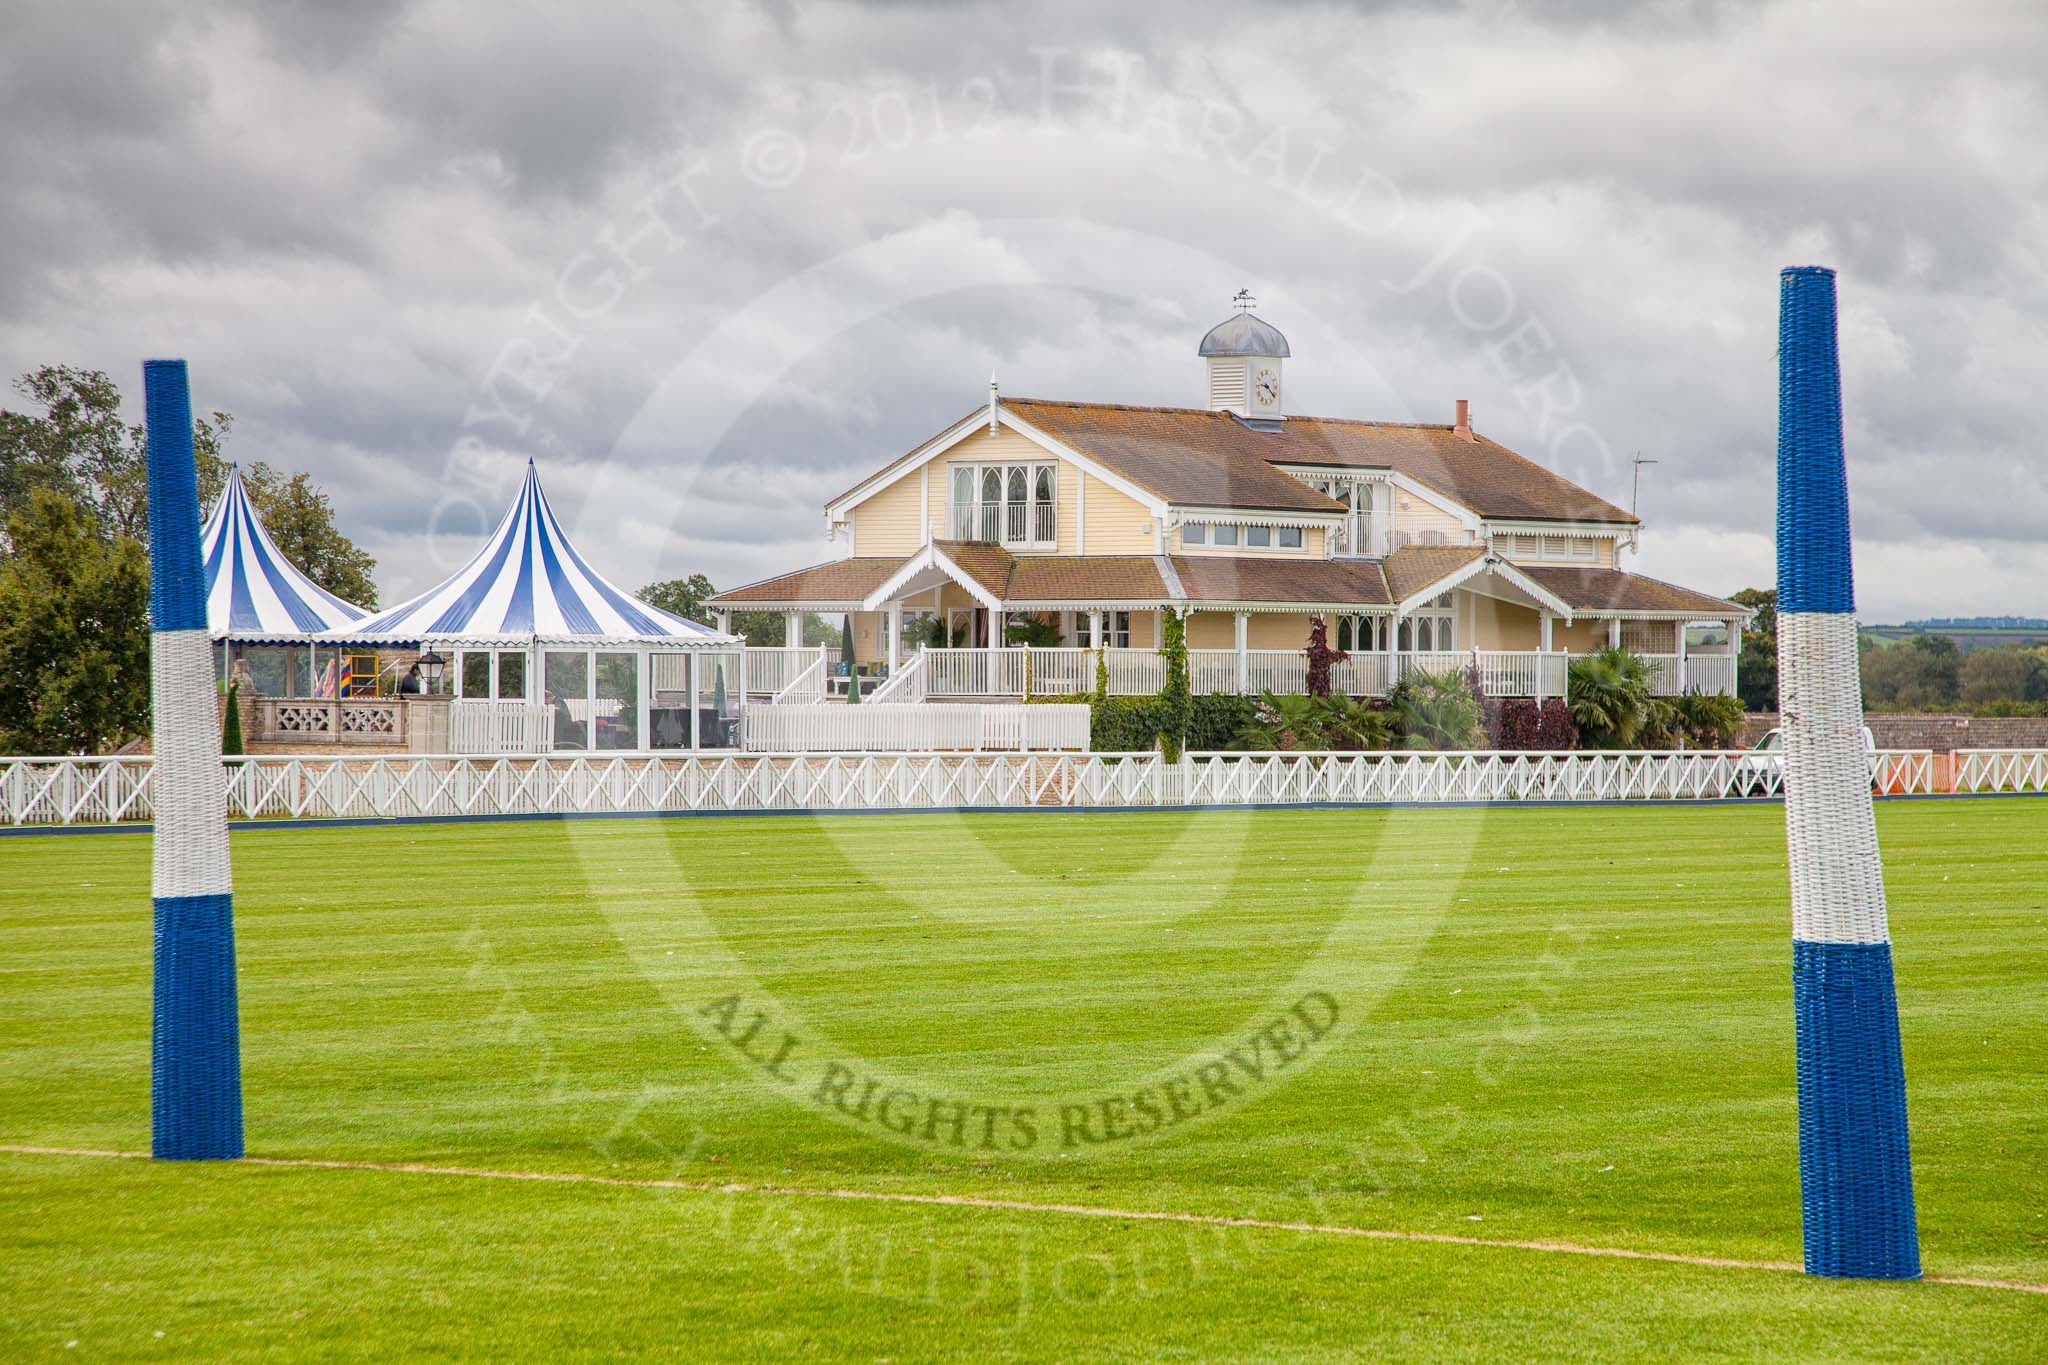 DBPC Polo in the Park 2012: The clubhouse seen from the goal line of the blue pitch on the Western side of the grounds..
Dallas Burston Polo Club,
Stoneythorpe Estate,
Southam,
Warwickshire,
United Kingdom,
on 16 September 2012 at 09:45, image #13